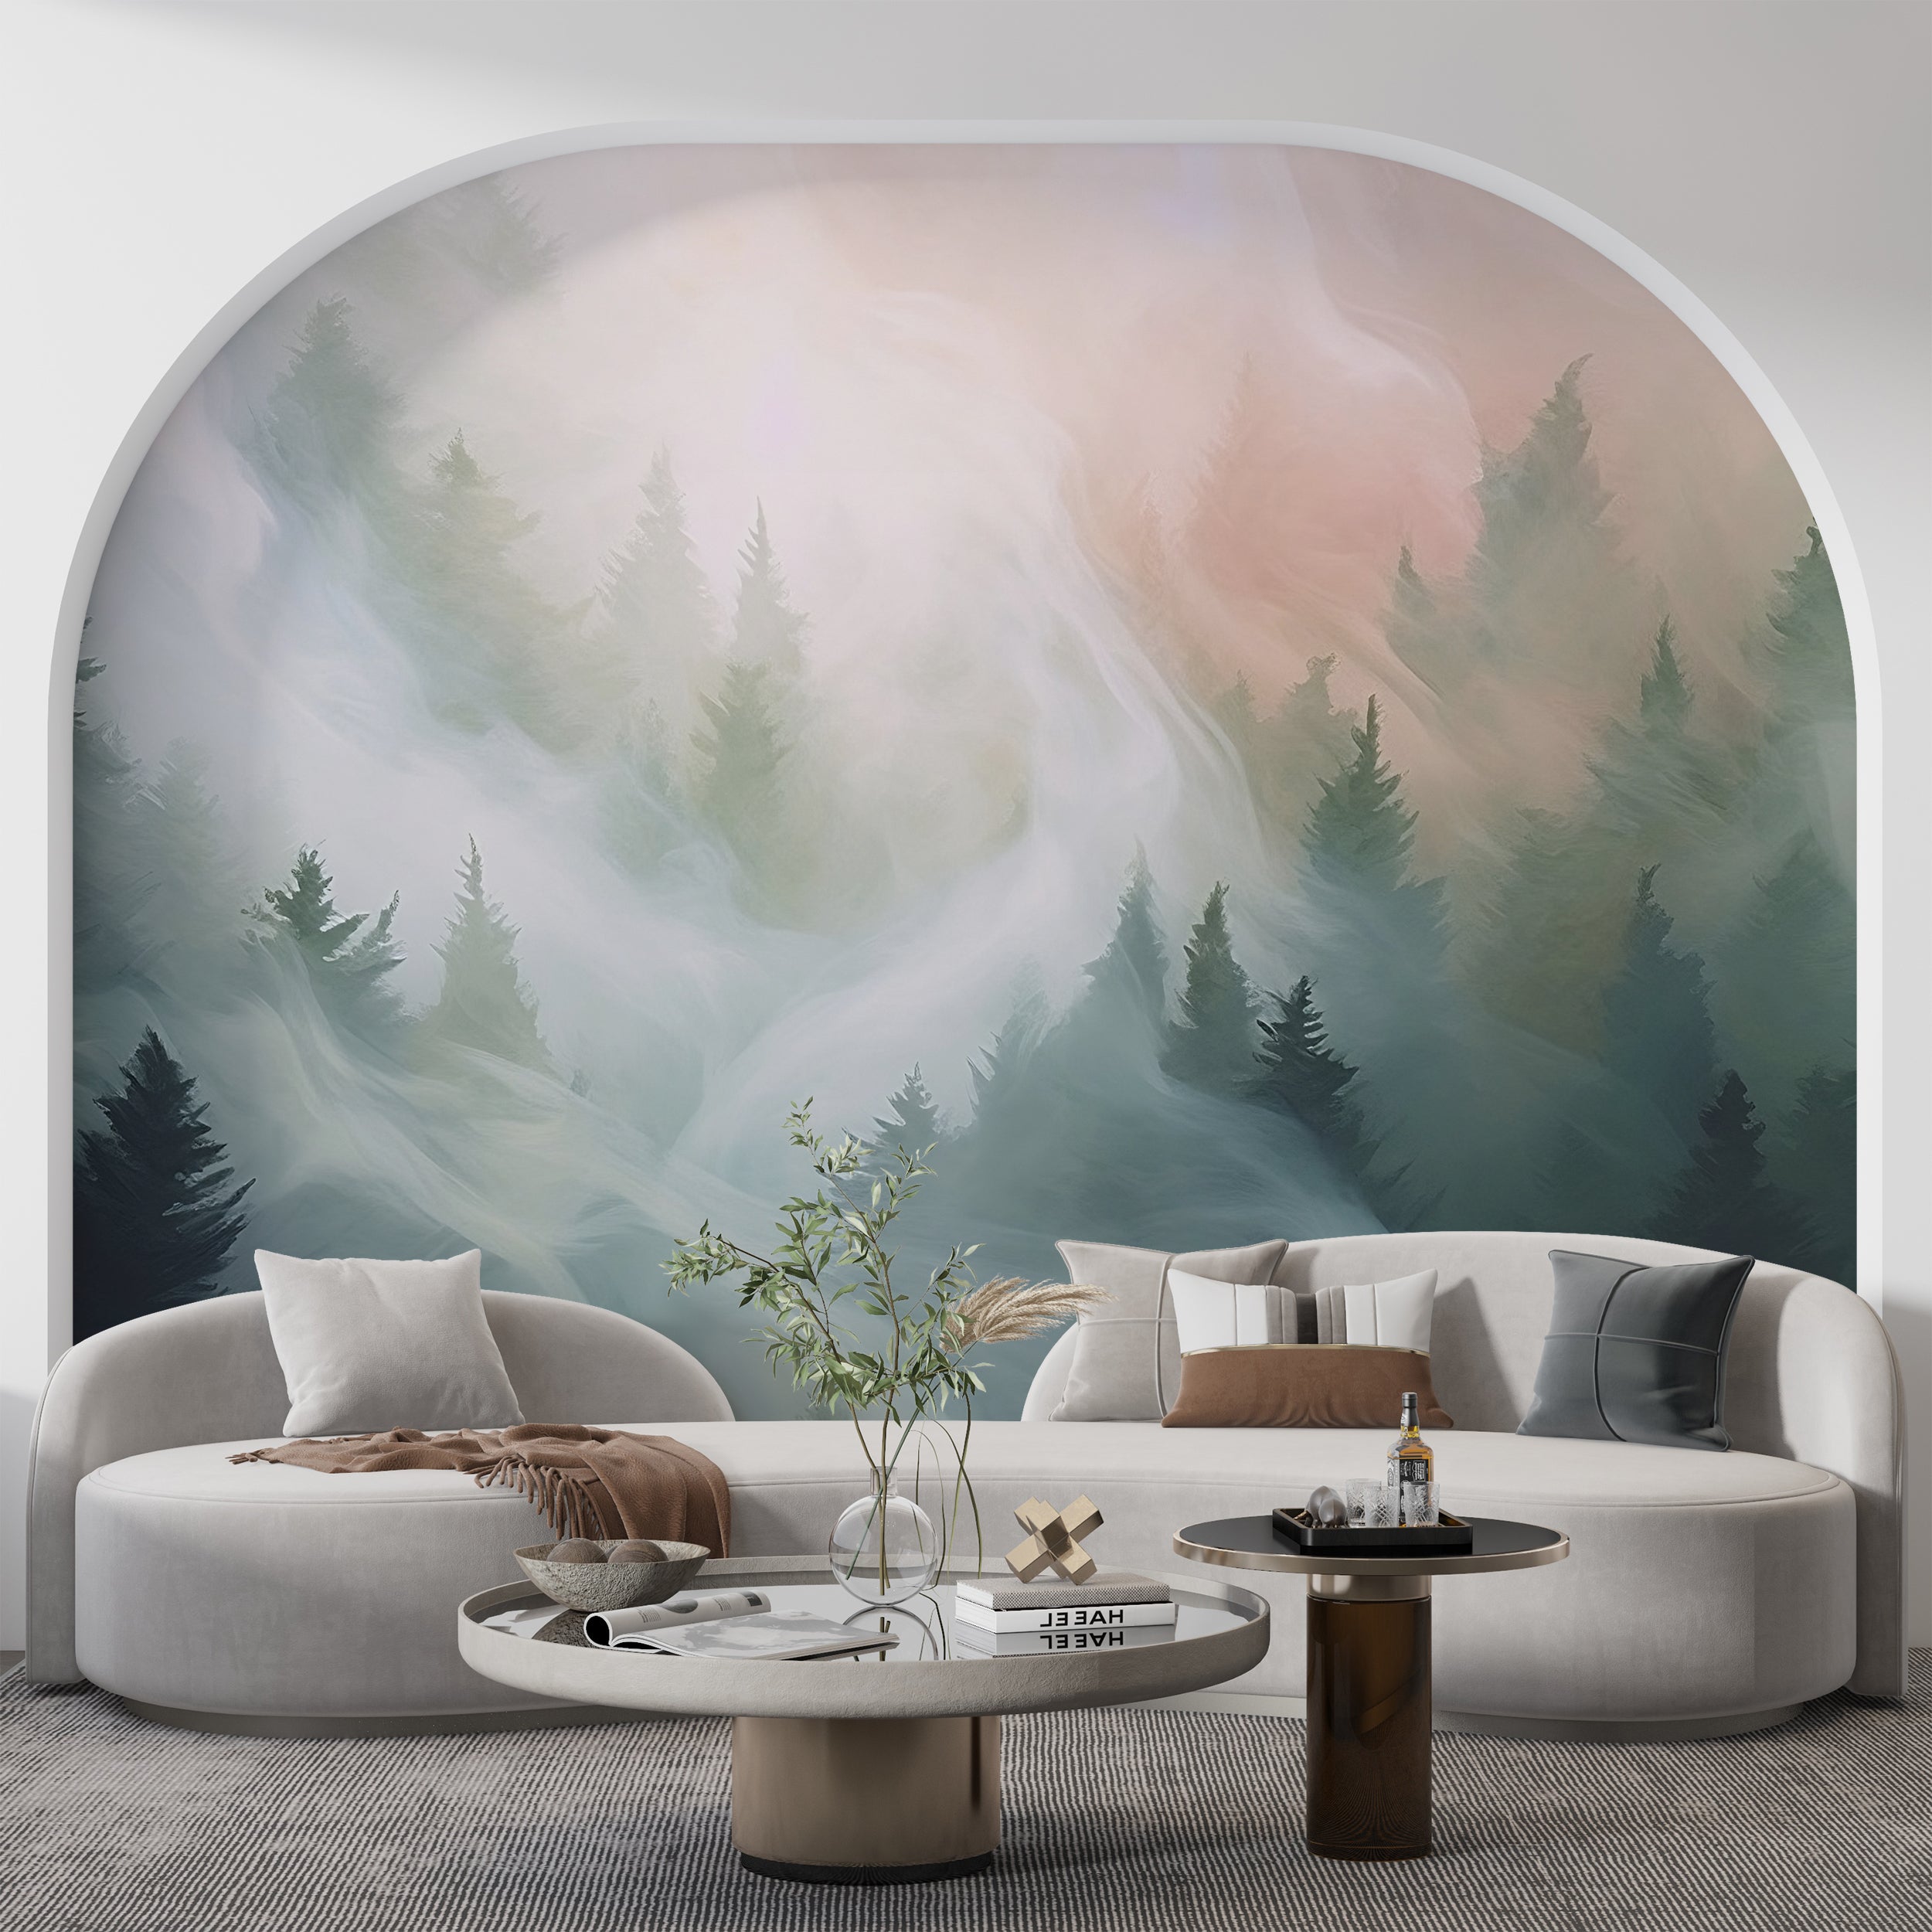 Peel And Stick Misty Forest Landscape Mural